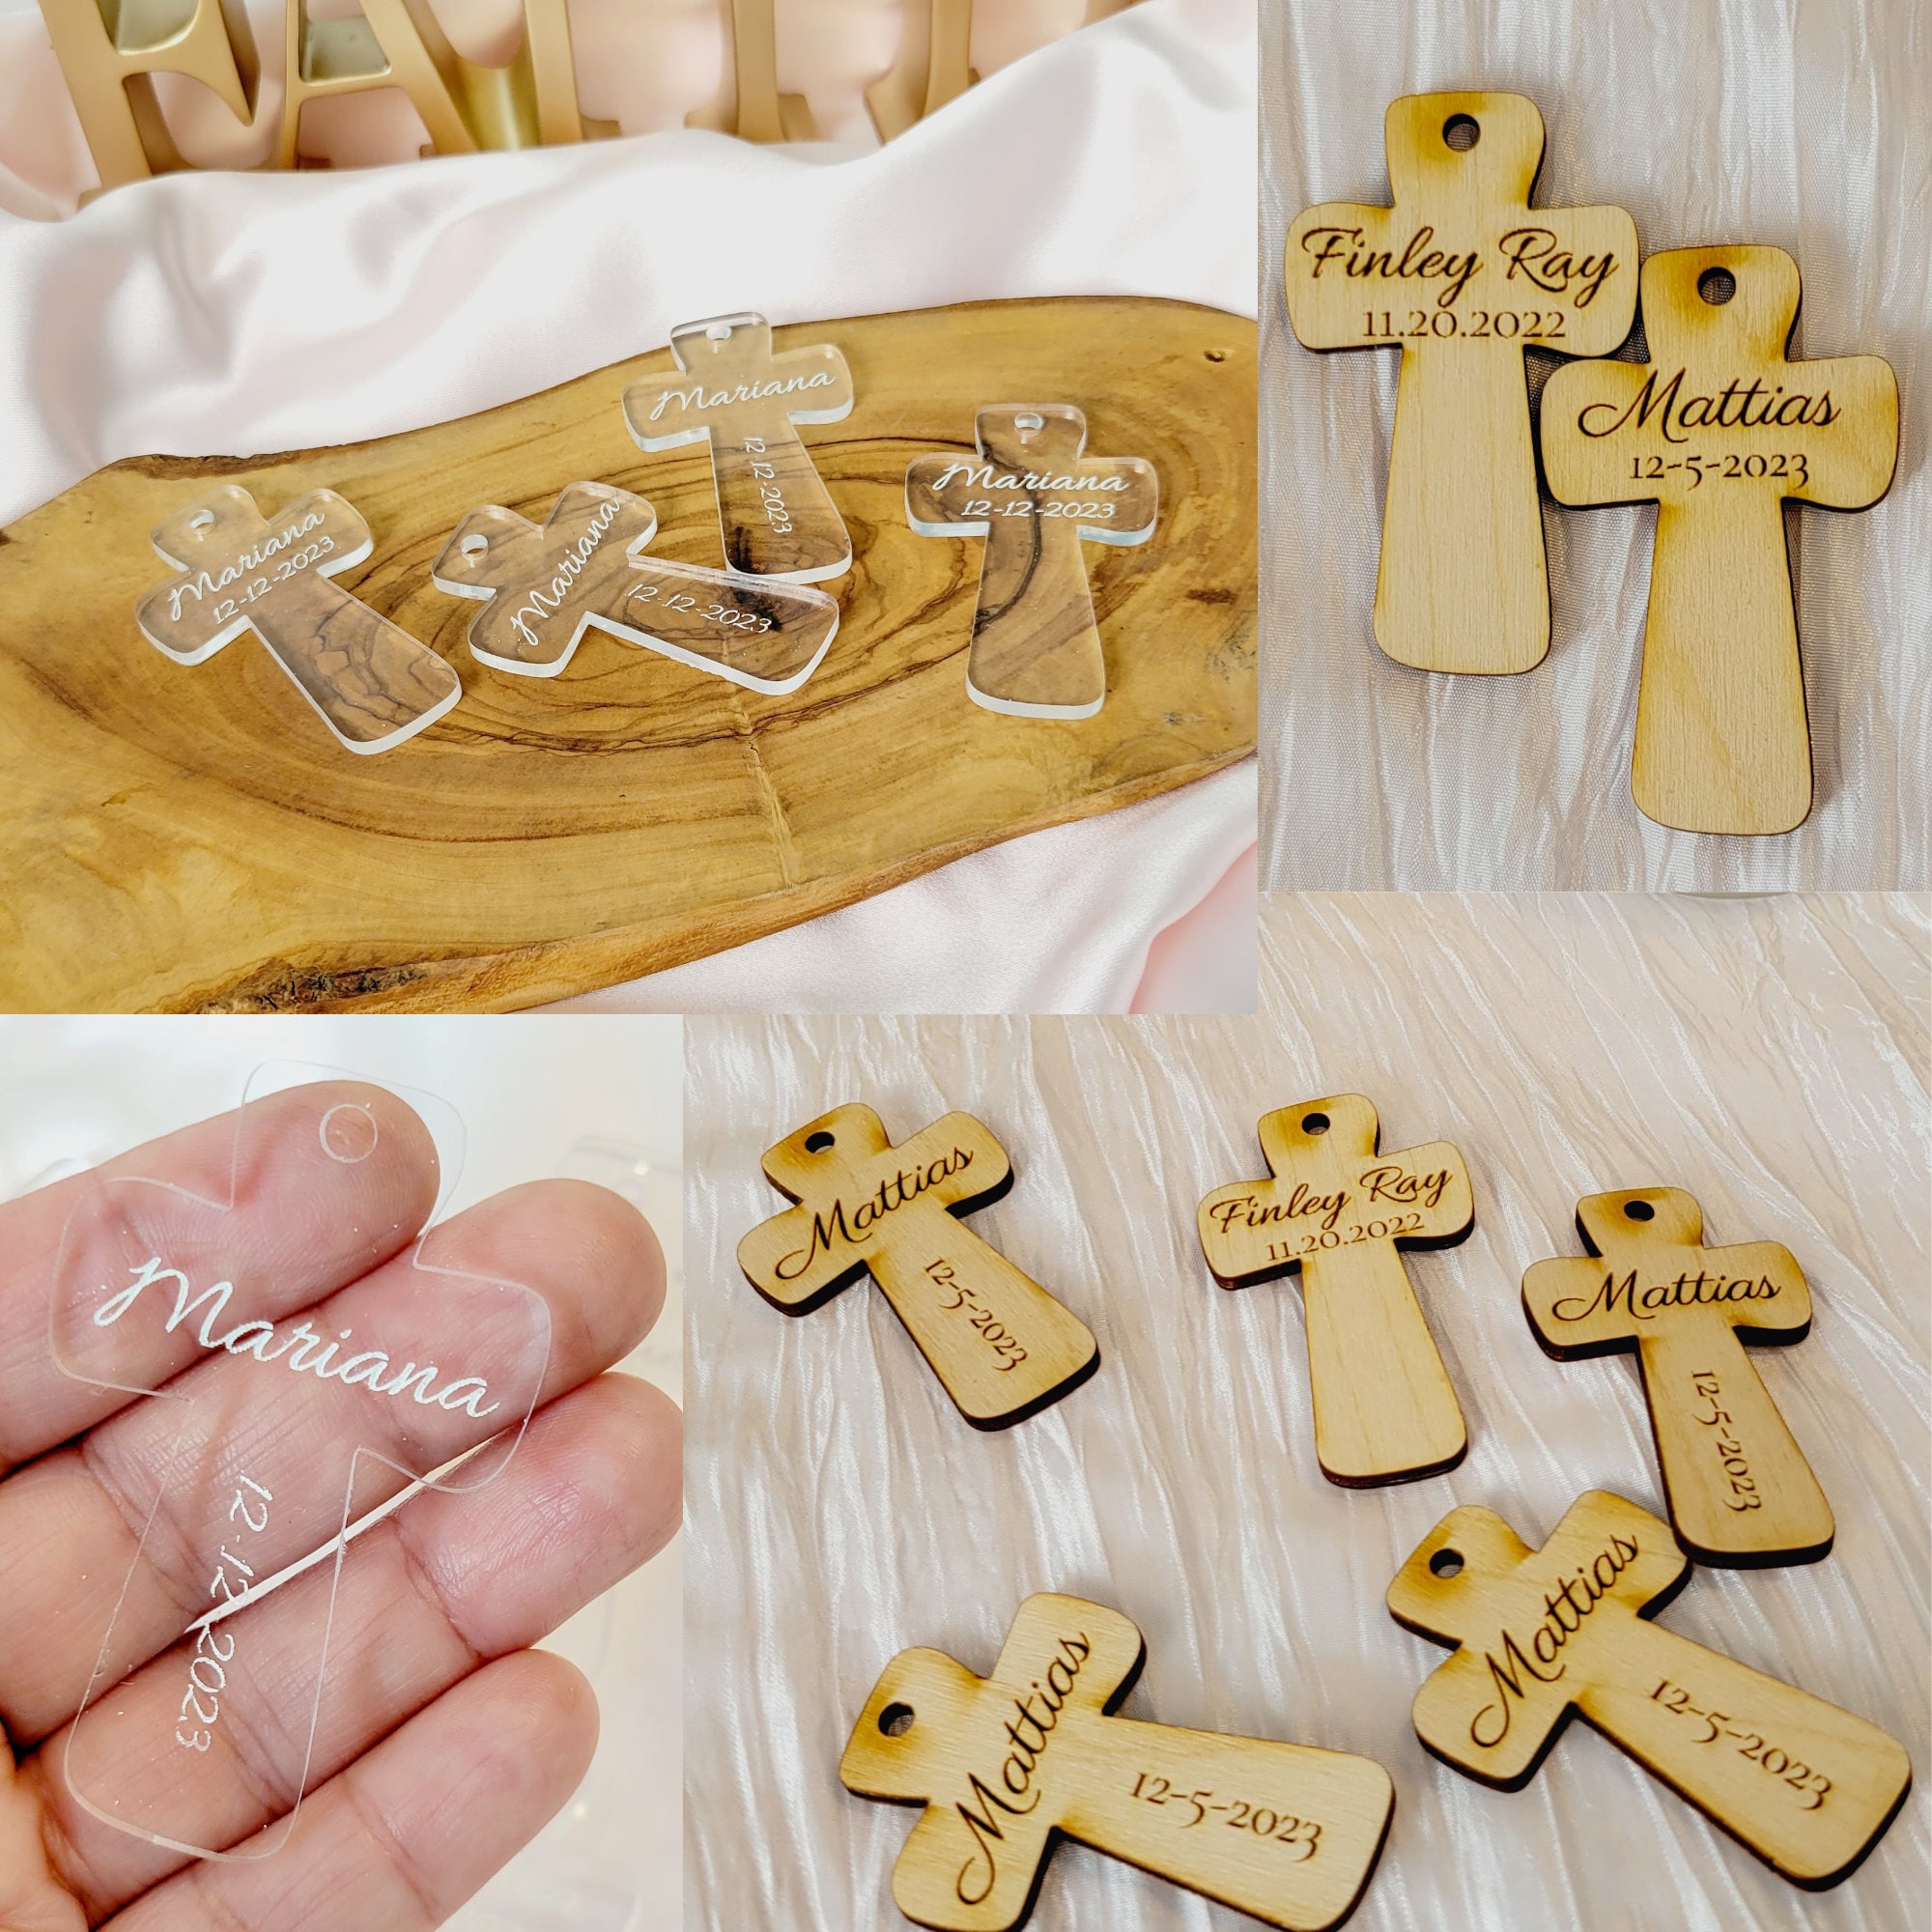 24 Pack Christian Cross Keychains, Bulk Religious Key Holders for First  Communion, Easter, Baptism, Funeral Favors for Guests (Silver, Gold, 3.6  In) 